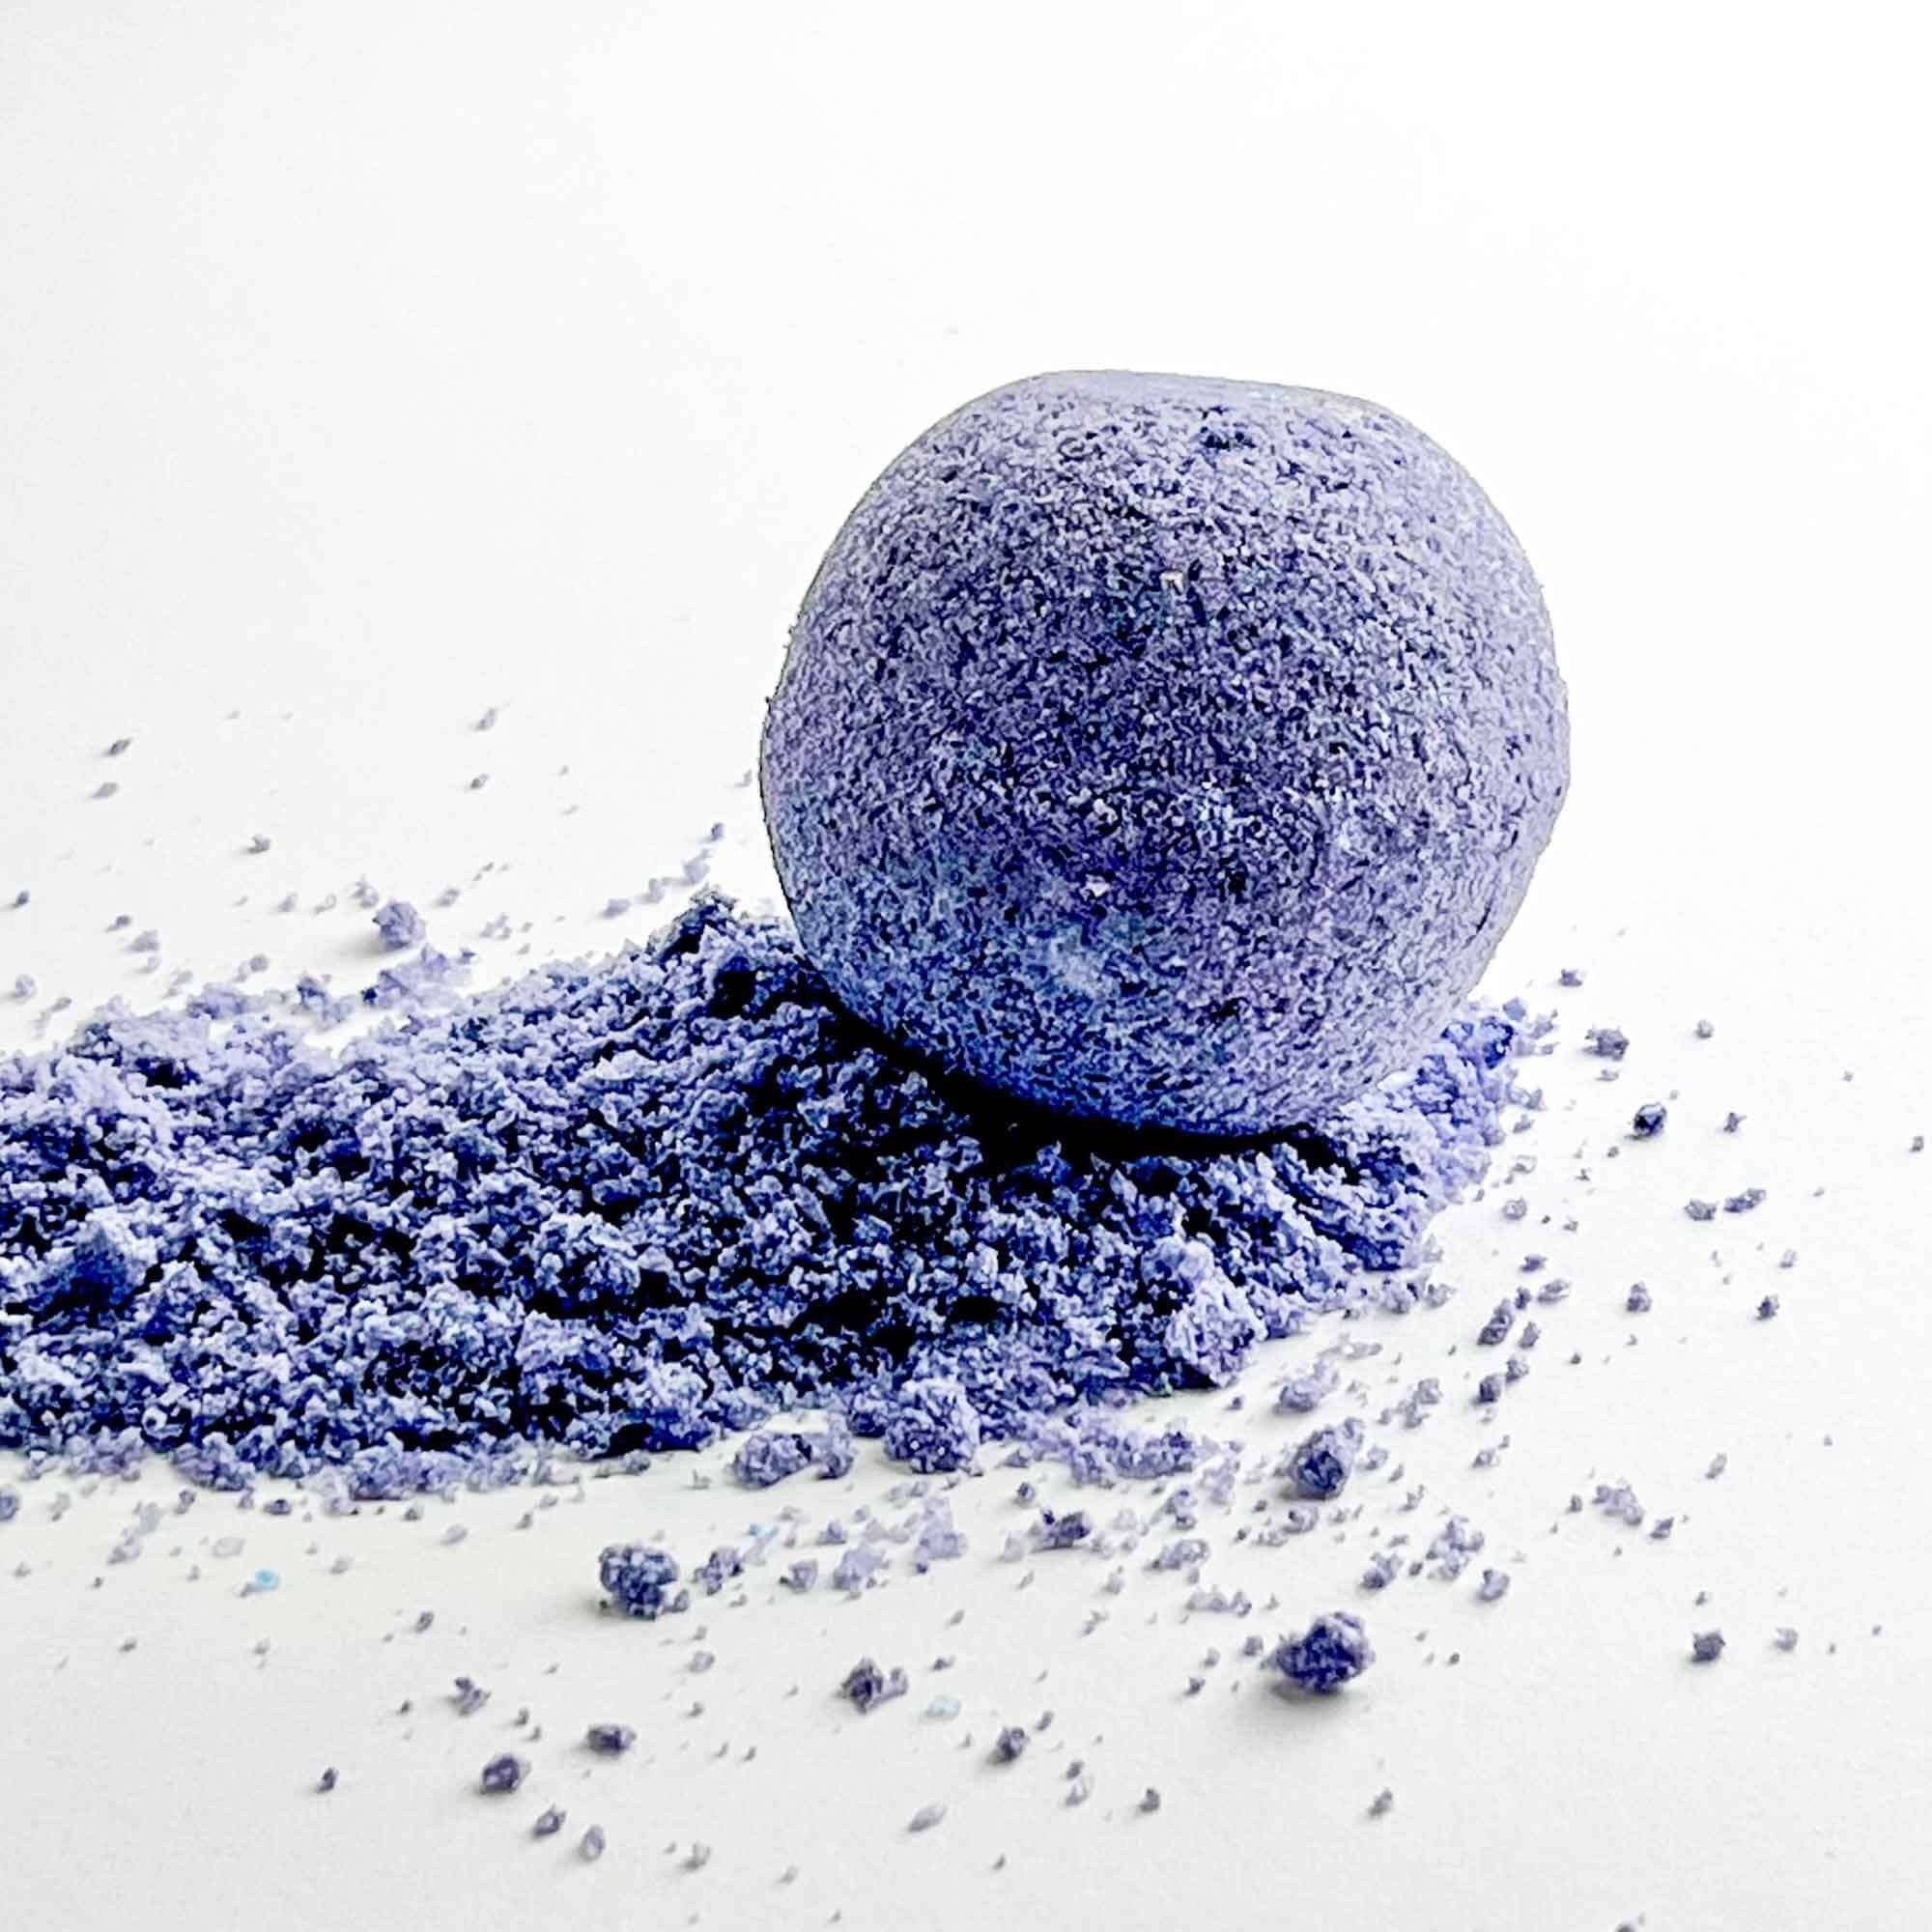 Relax and Rejuvenate with Lavender Cedar Bath Bombs